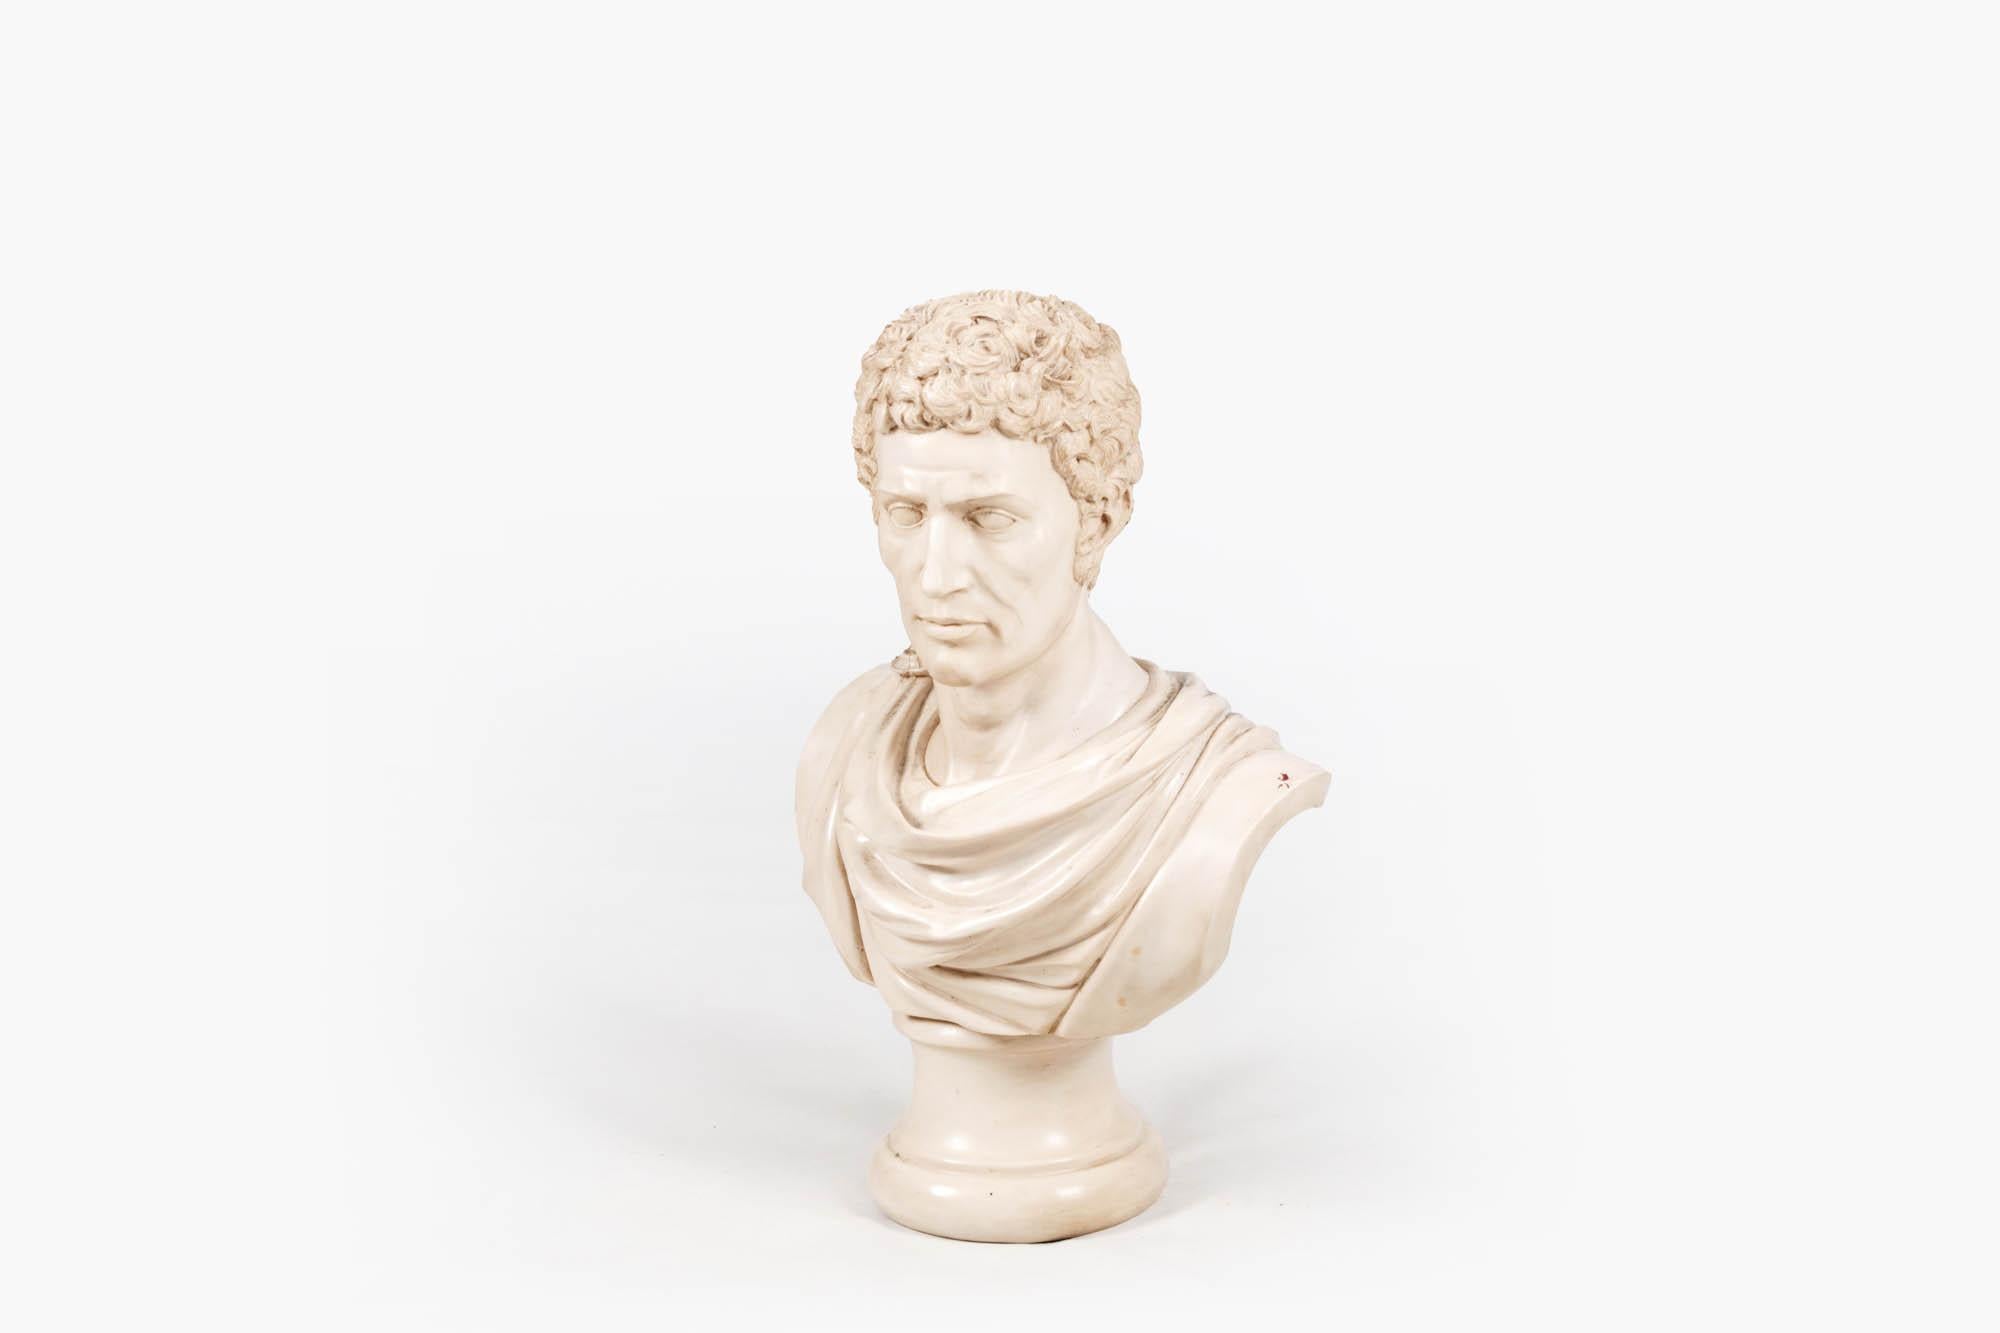 19th Century resin bust, likely of a Roman nobleman, or possibly the famous general Lucius Junius Brutus who orchestrated a revolt to overthrow the last king of Rome and establish the Roman Republic in 509 BCE. He is depicted wearing a flowing toga